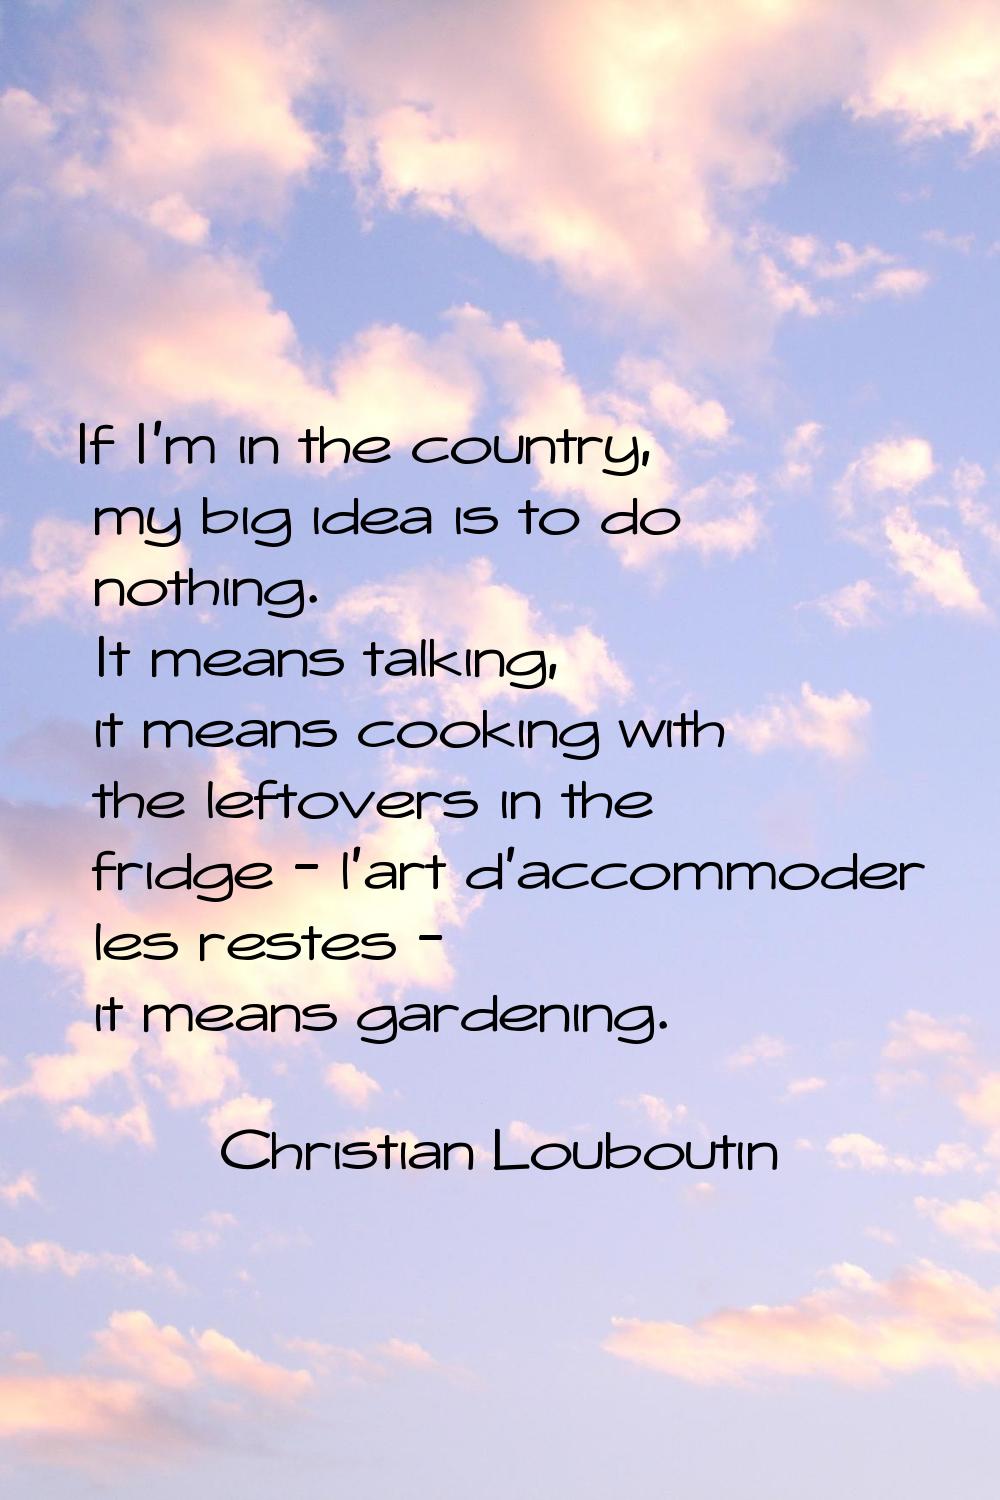 If I'm in the country, my big idea is to do nothing. It means talking, it means cooking with the le